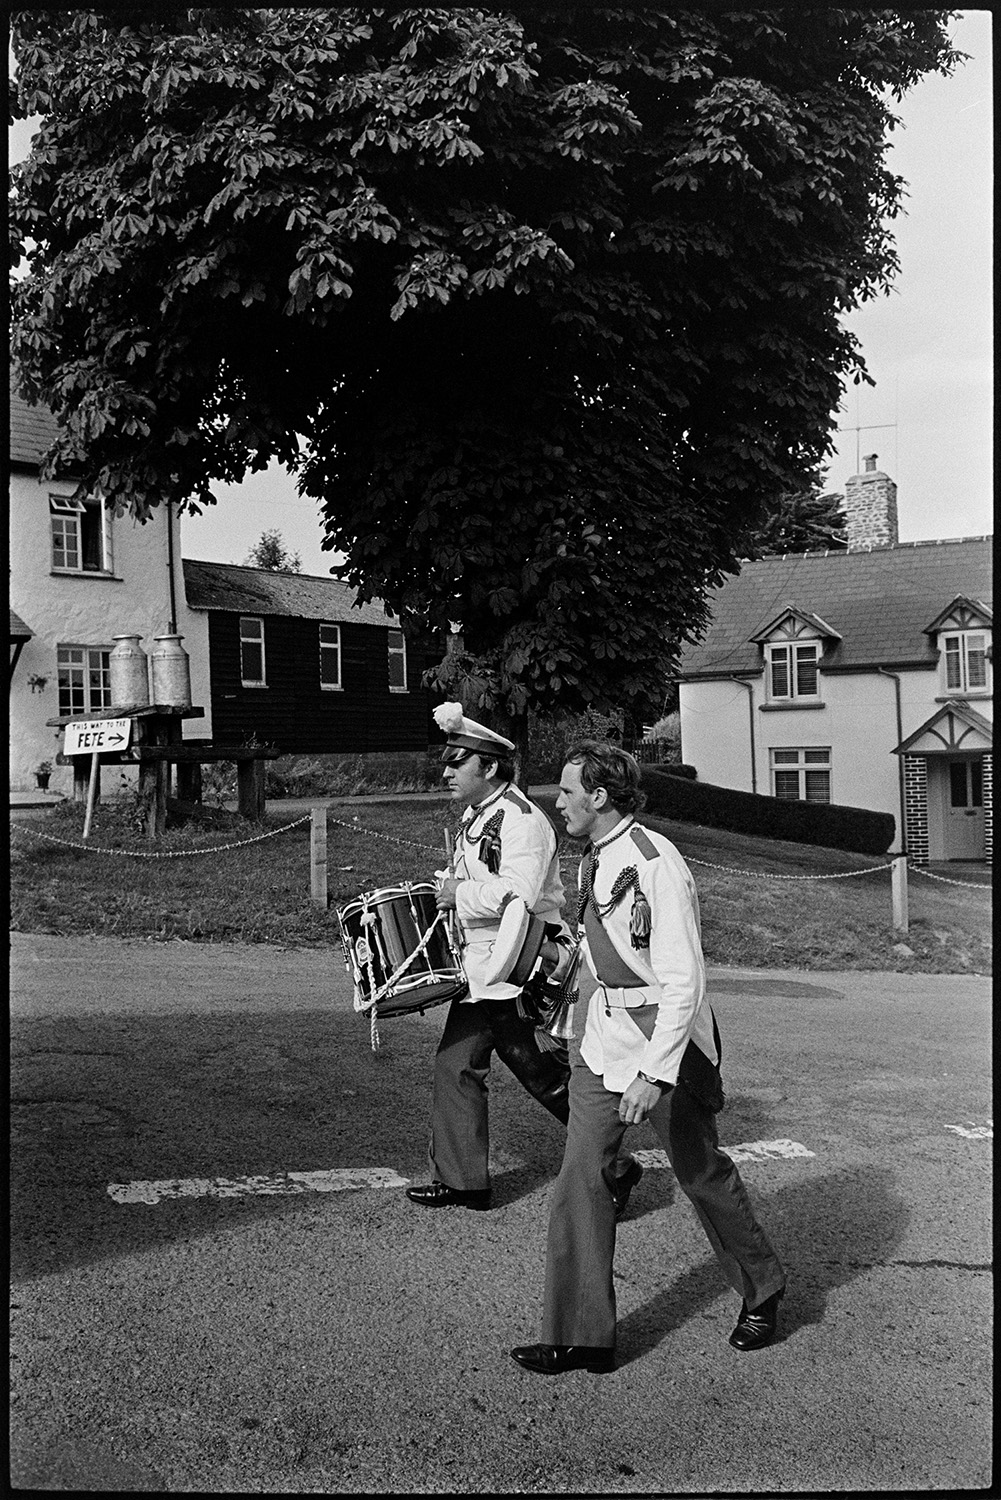 Bandsman walking back after playing at fete. 
[Two bandsmen walking home after performing at Atherington Village fete. One of them is carrying a drum. Two milk churns are on a stand under a tree in the background.]